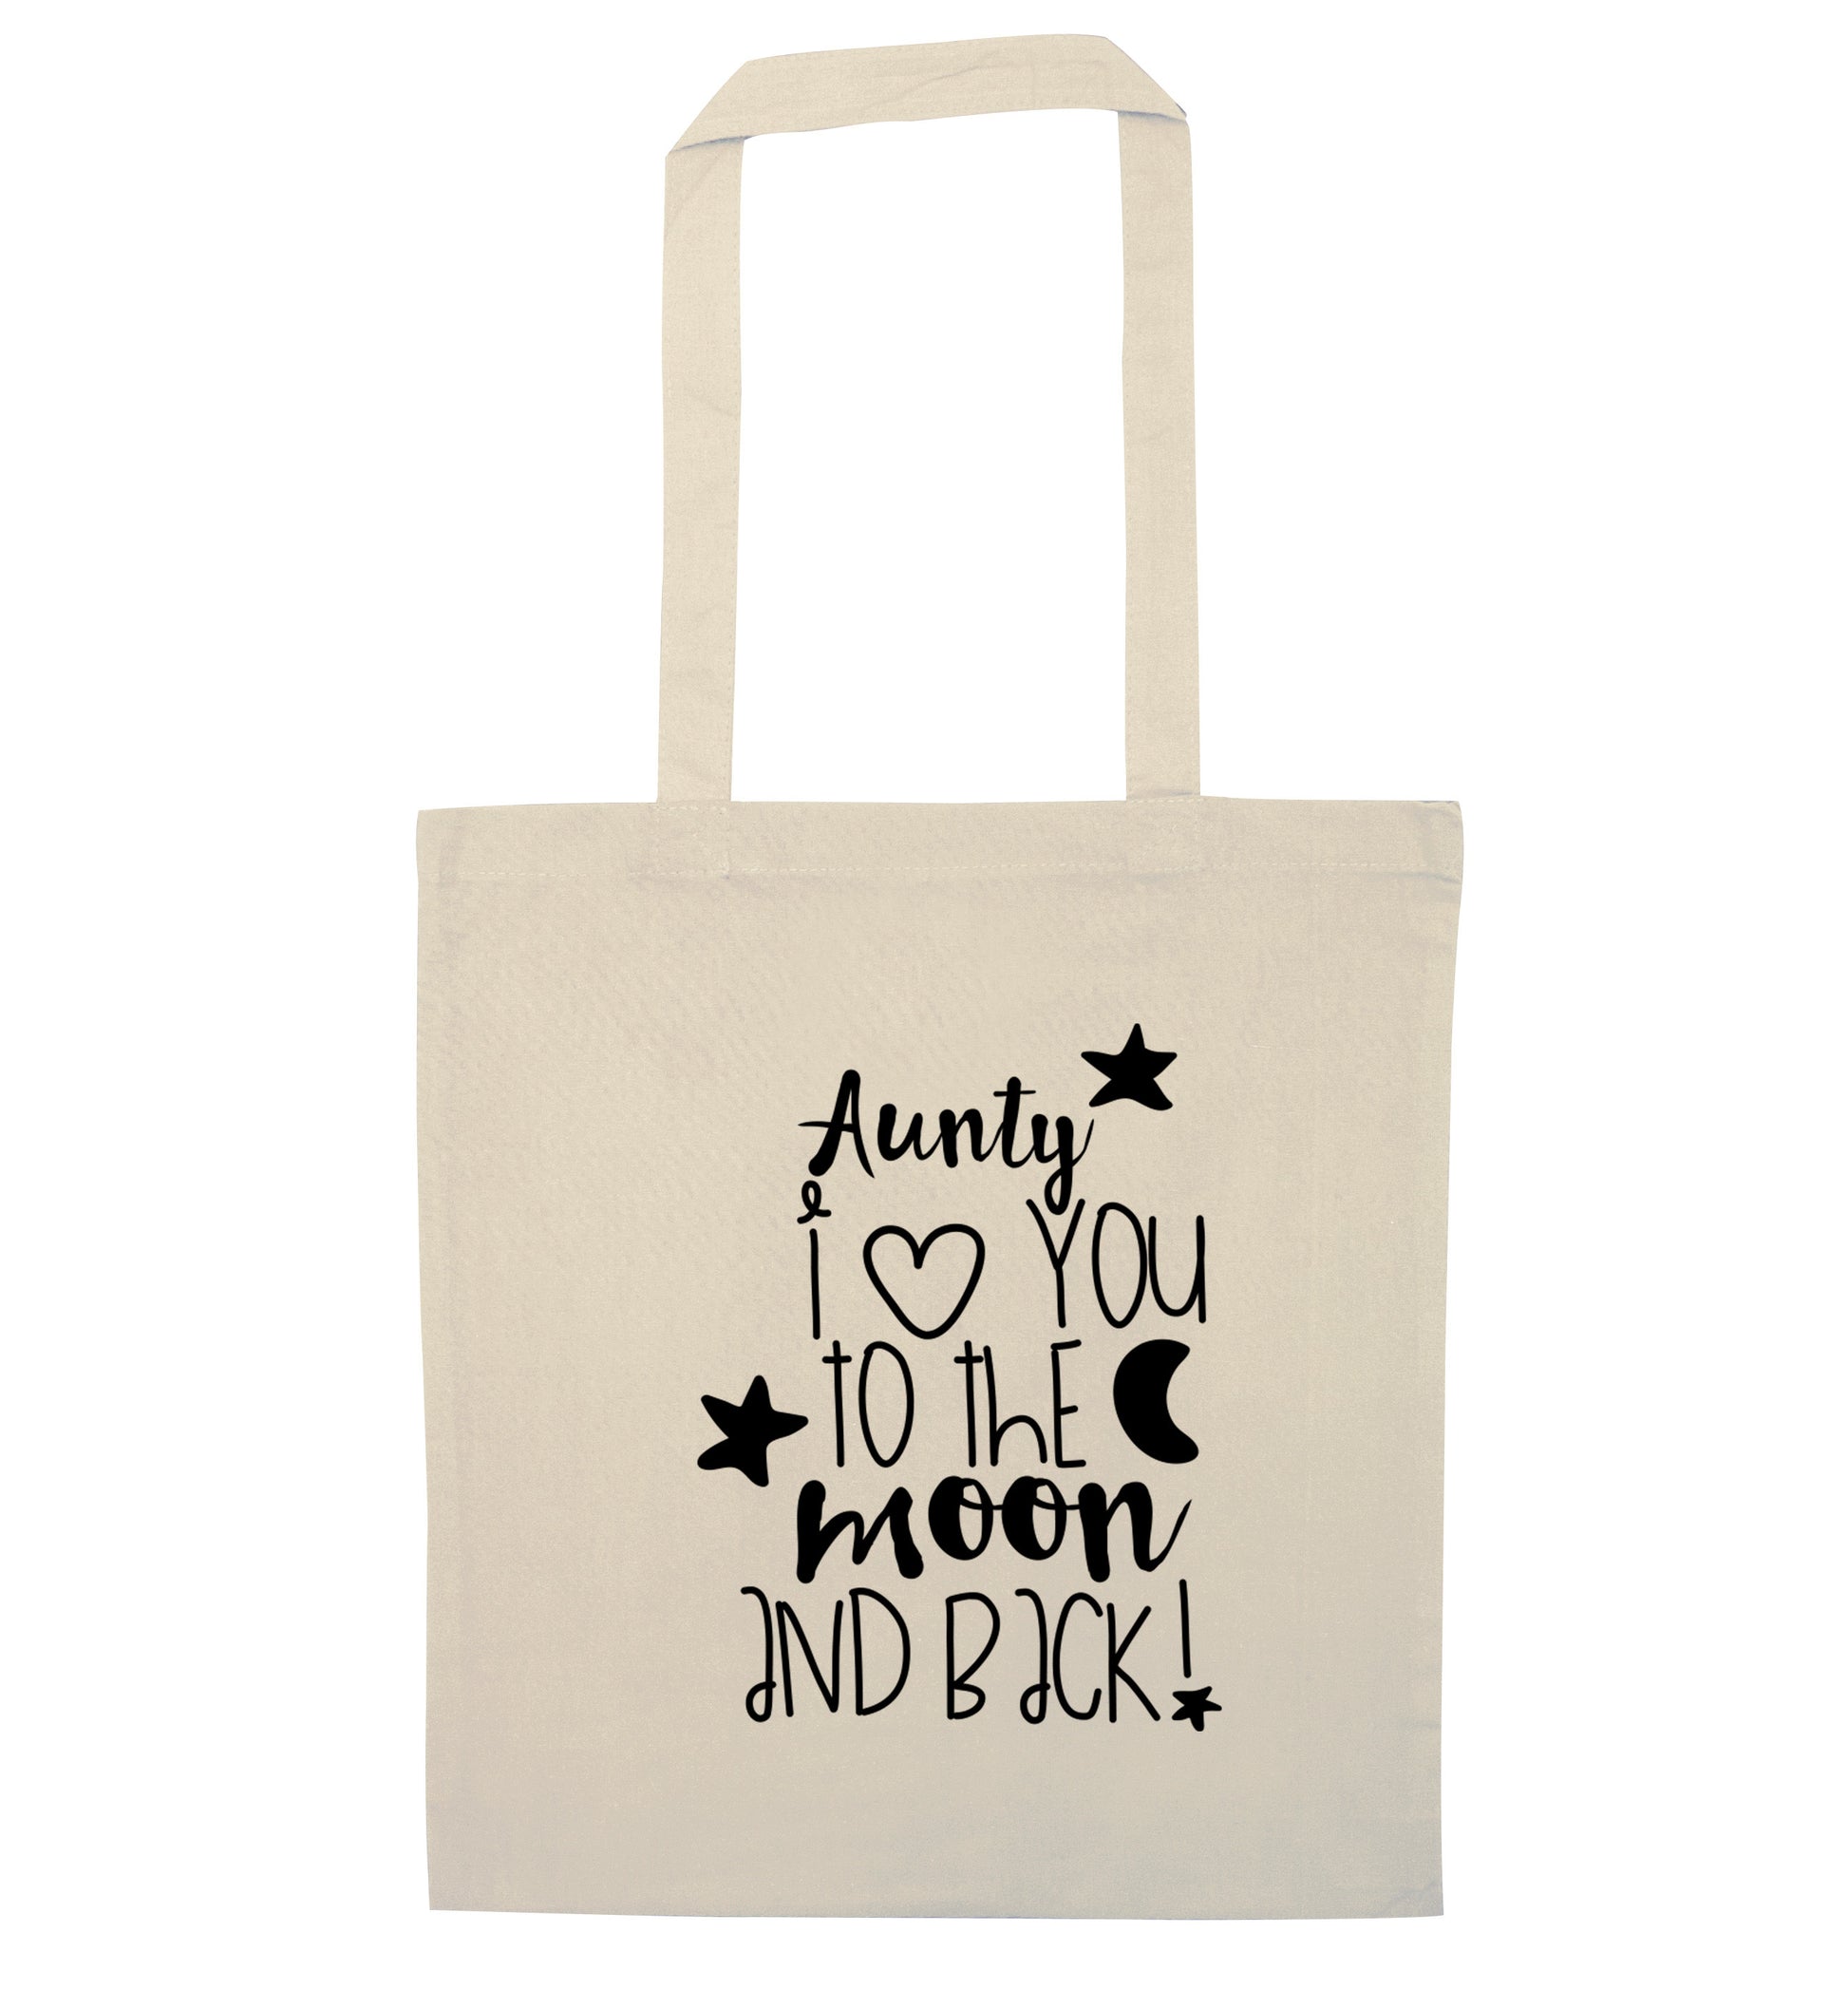 Aunty I love you to the moon and back natural tote bag